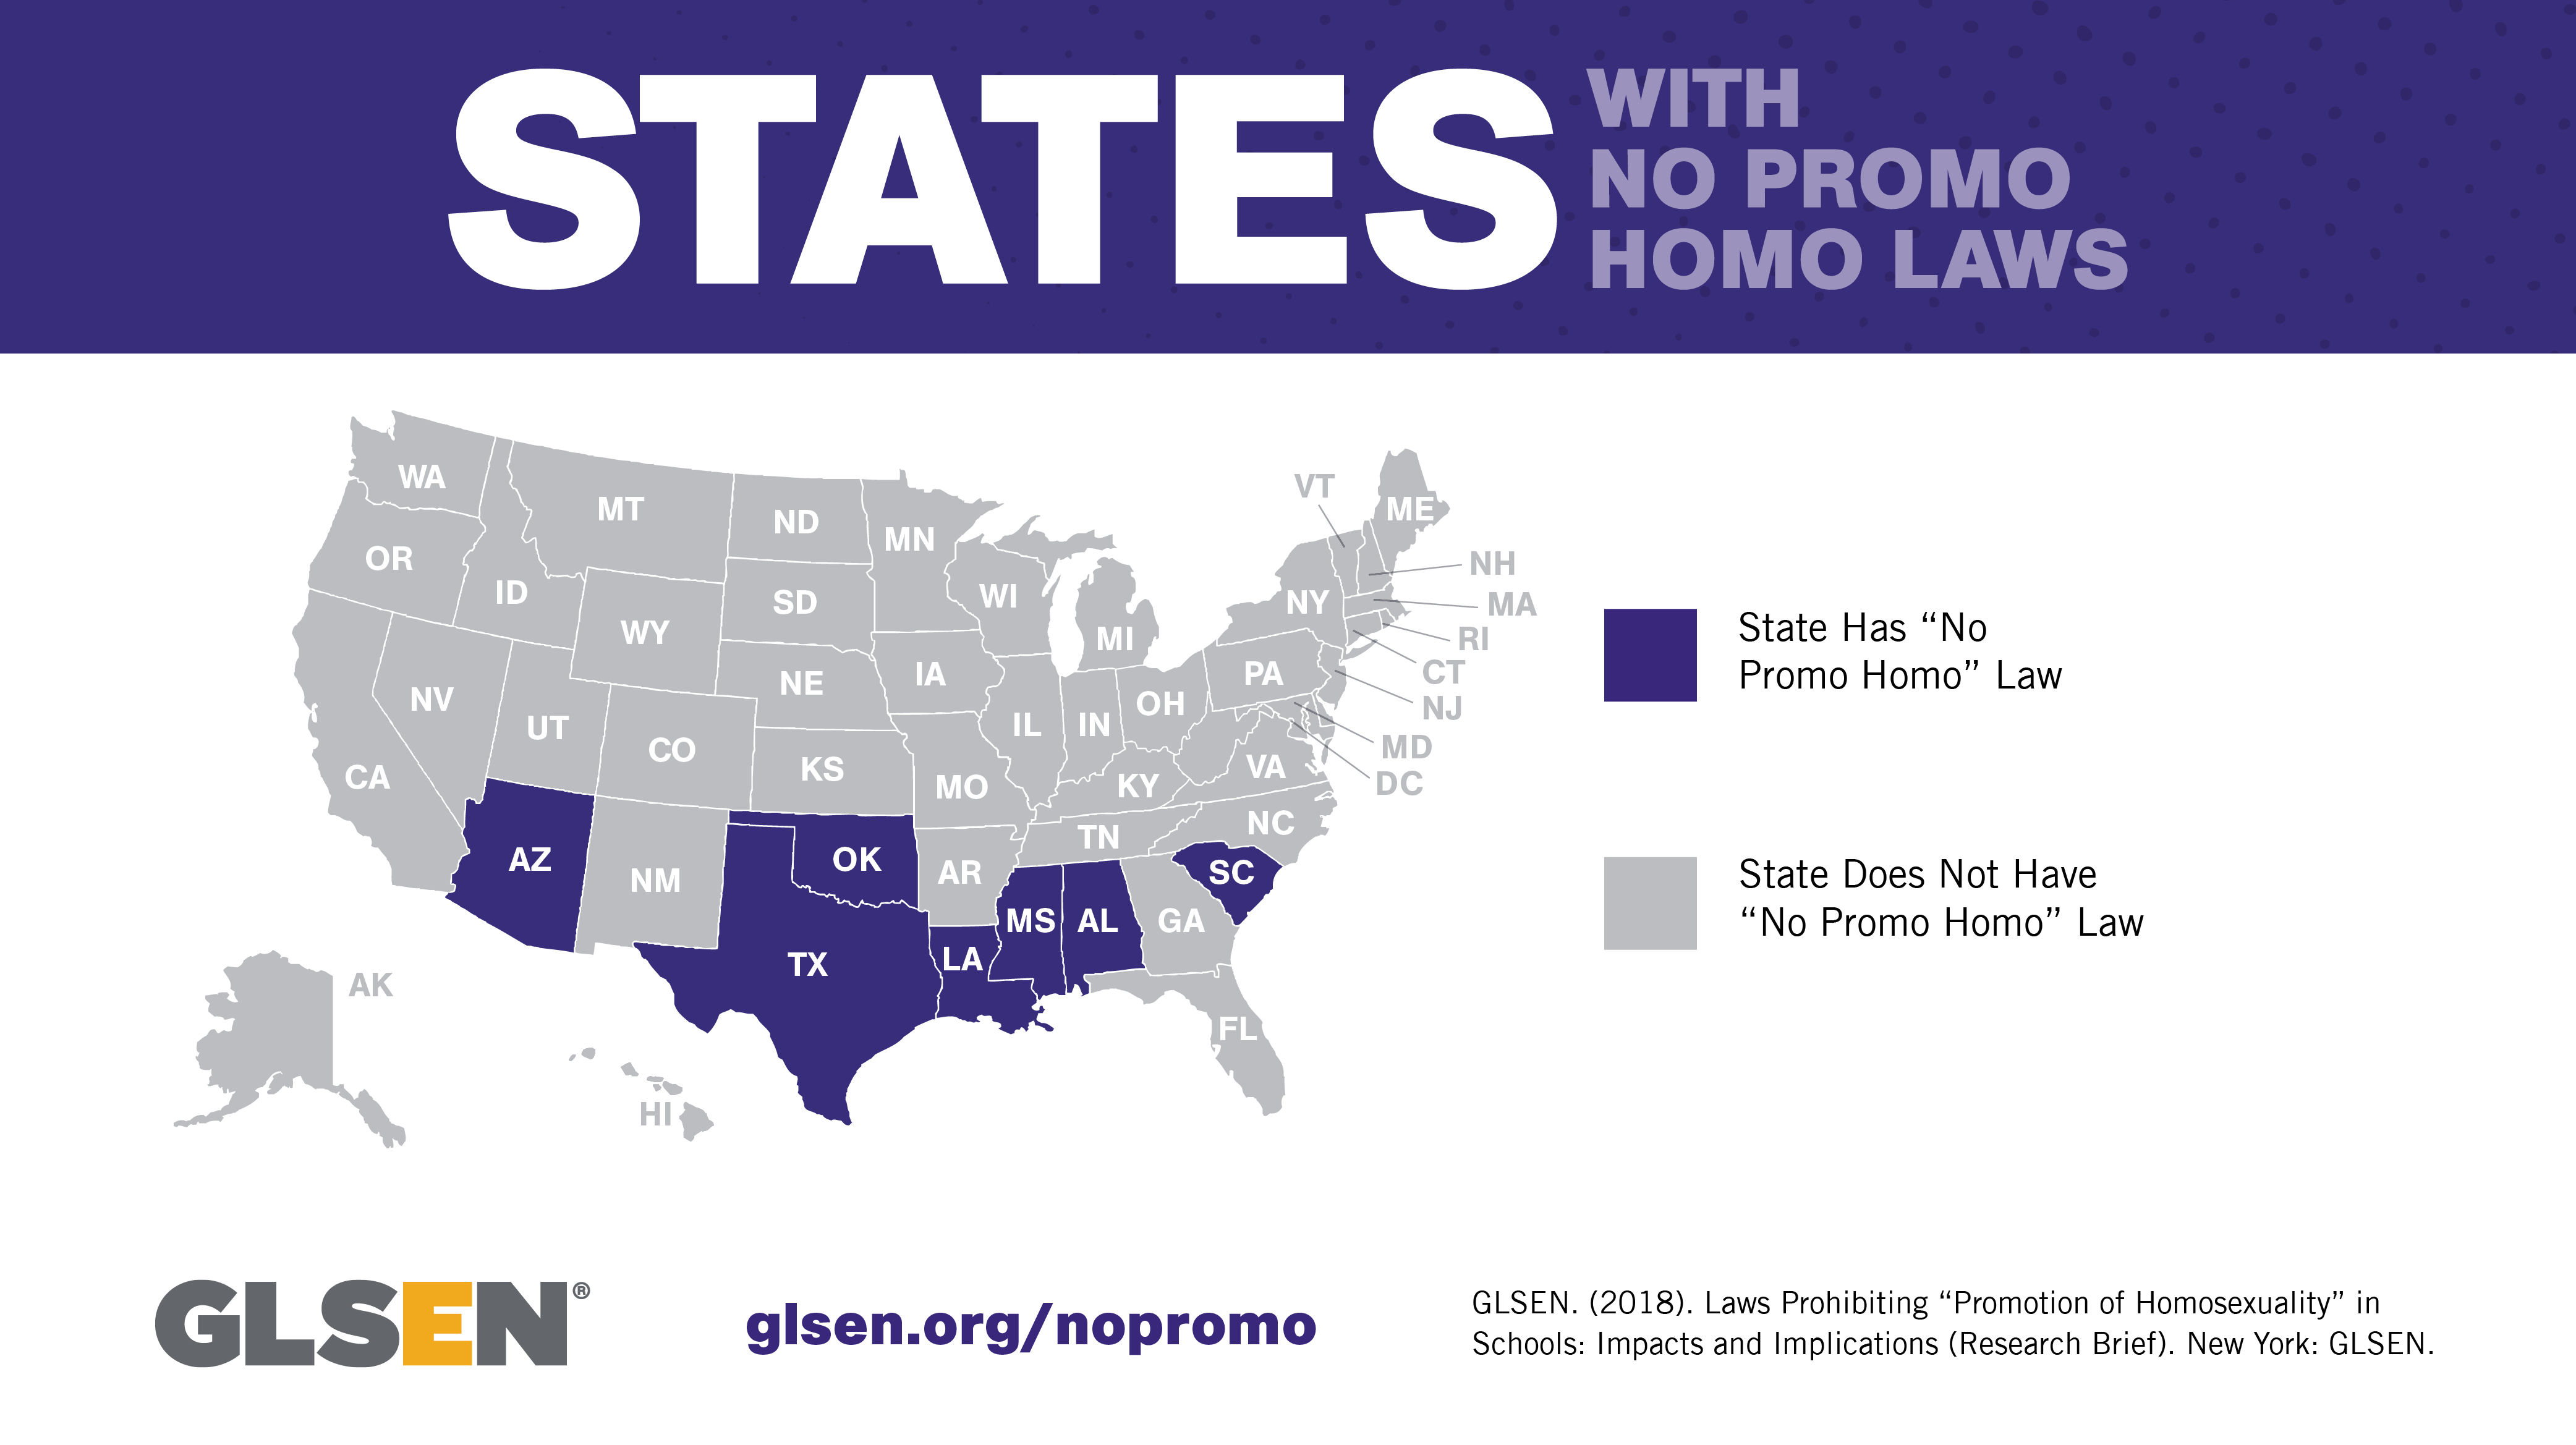 Map of States with "No Promo Homo" Laws, as of January 2018